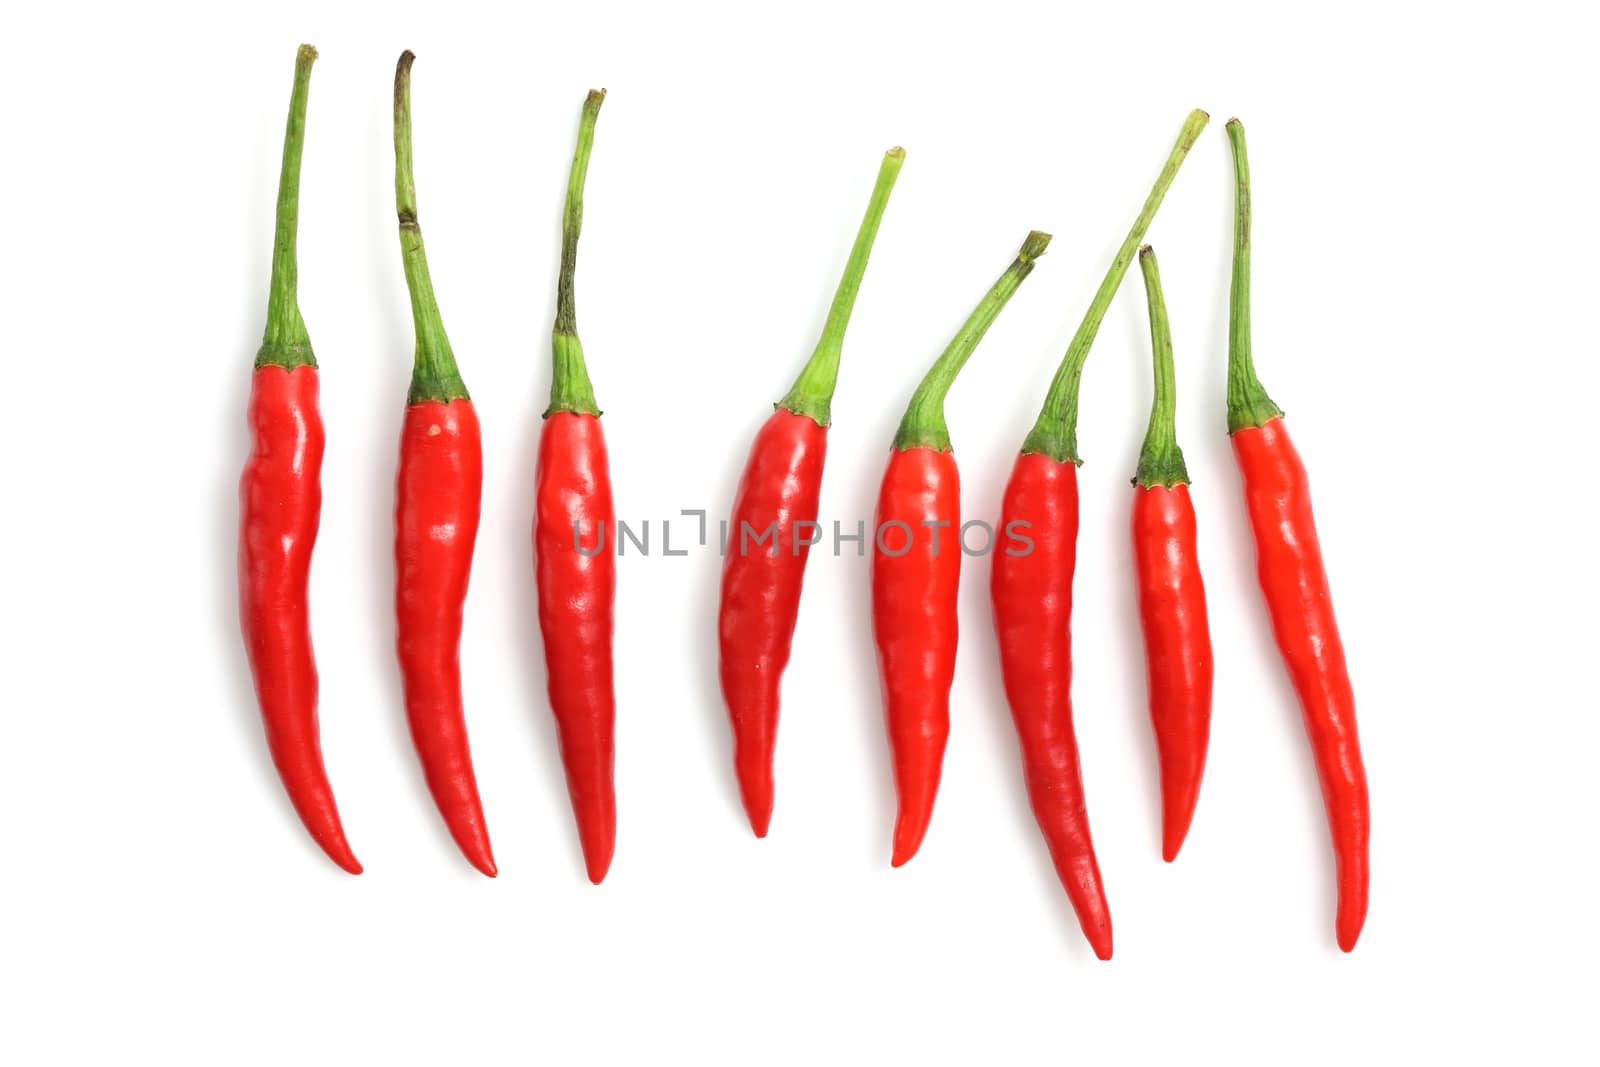 Red hot chili pepper isolated on a white background  by piyato